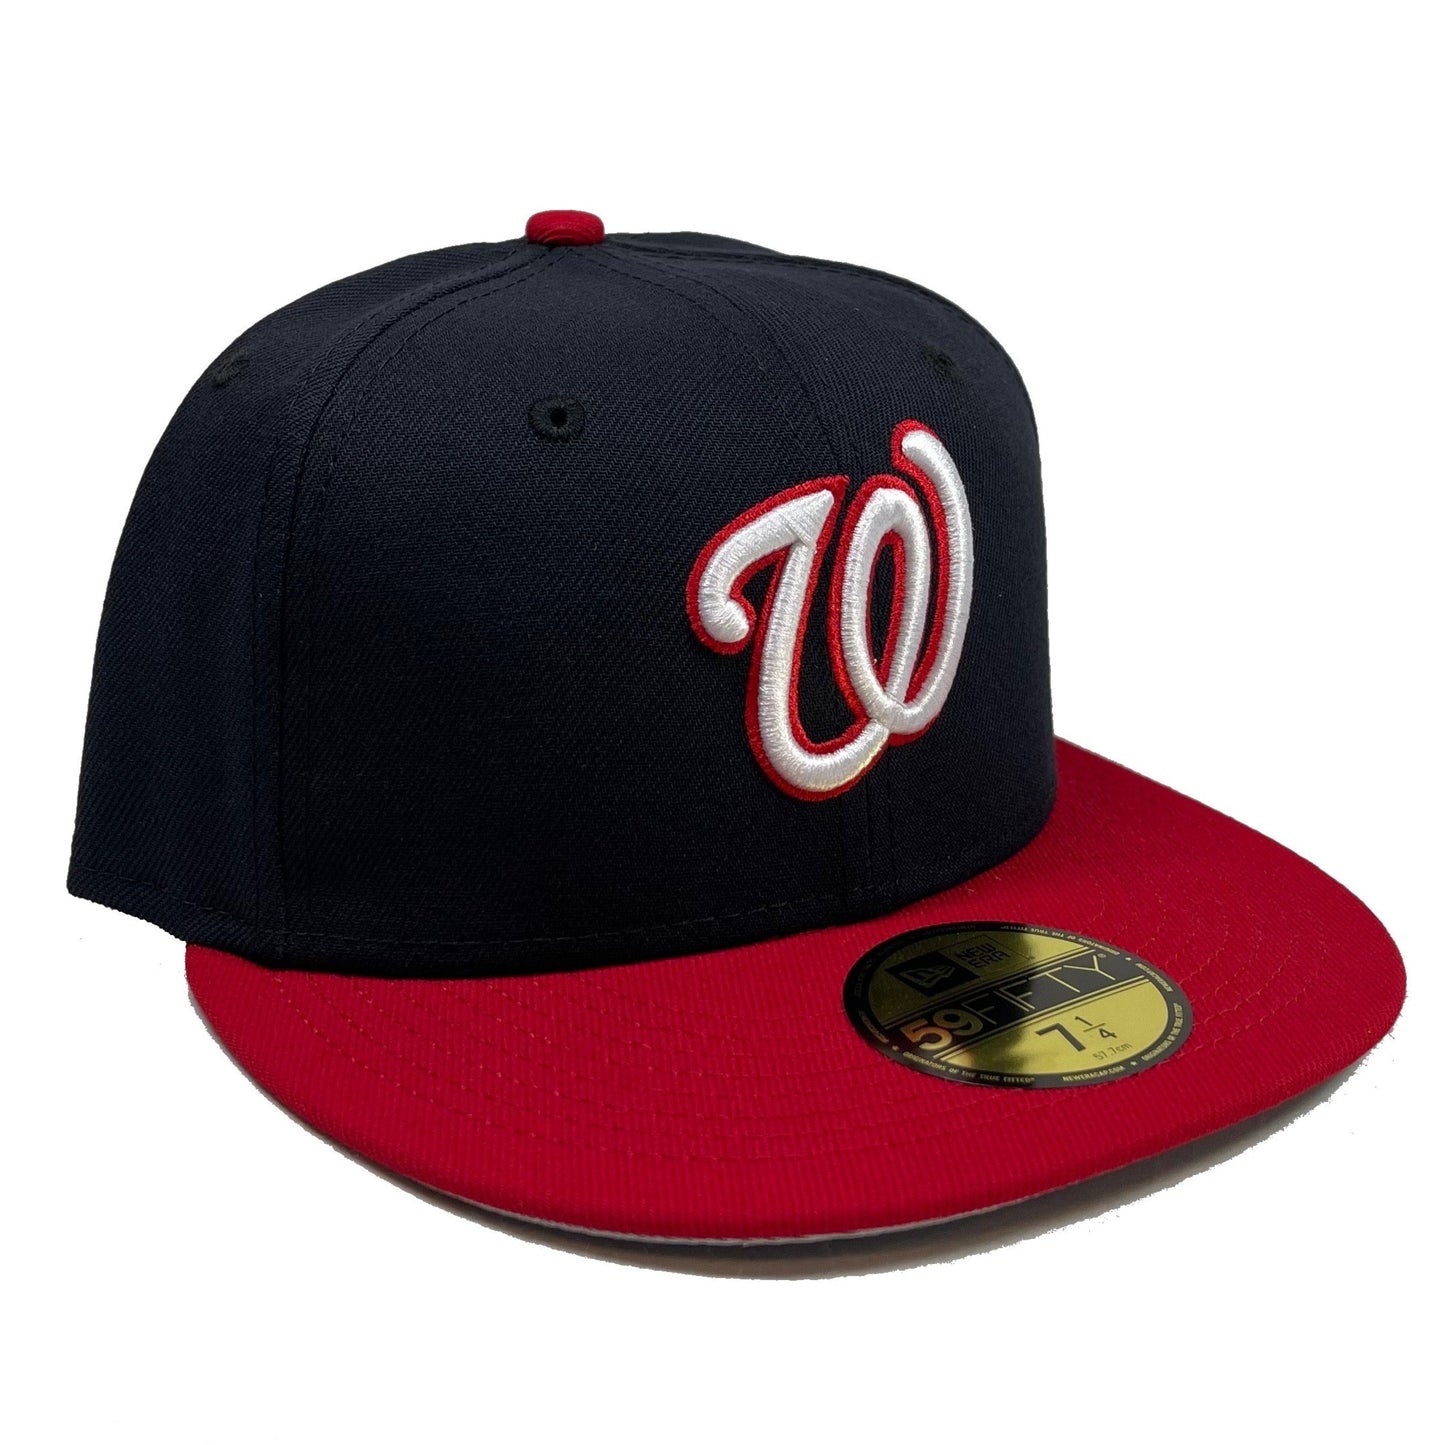 Washington Nationals Logo (Navy/Red) Fitted